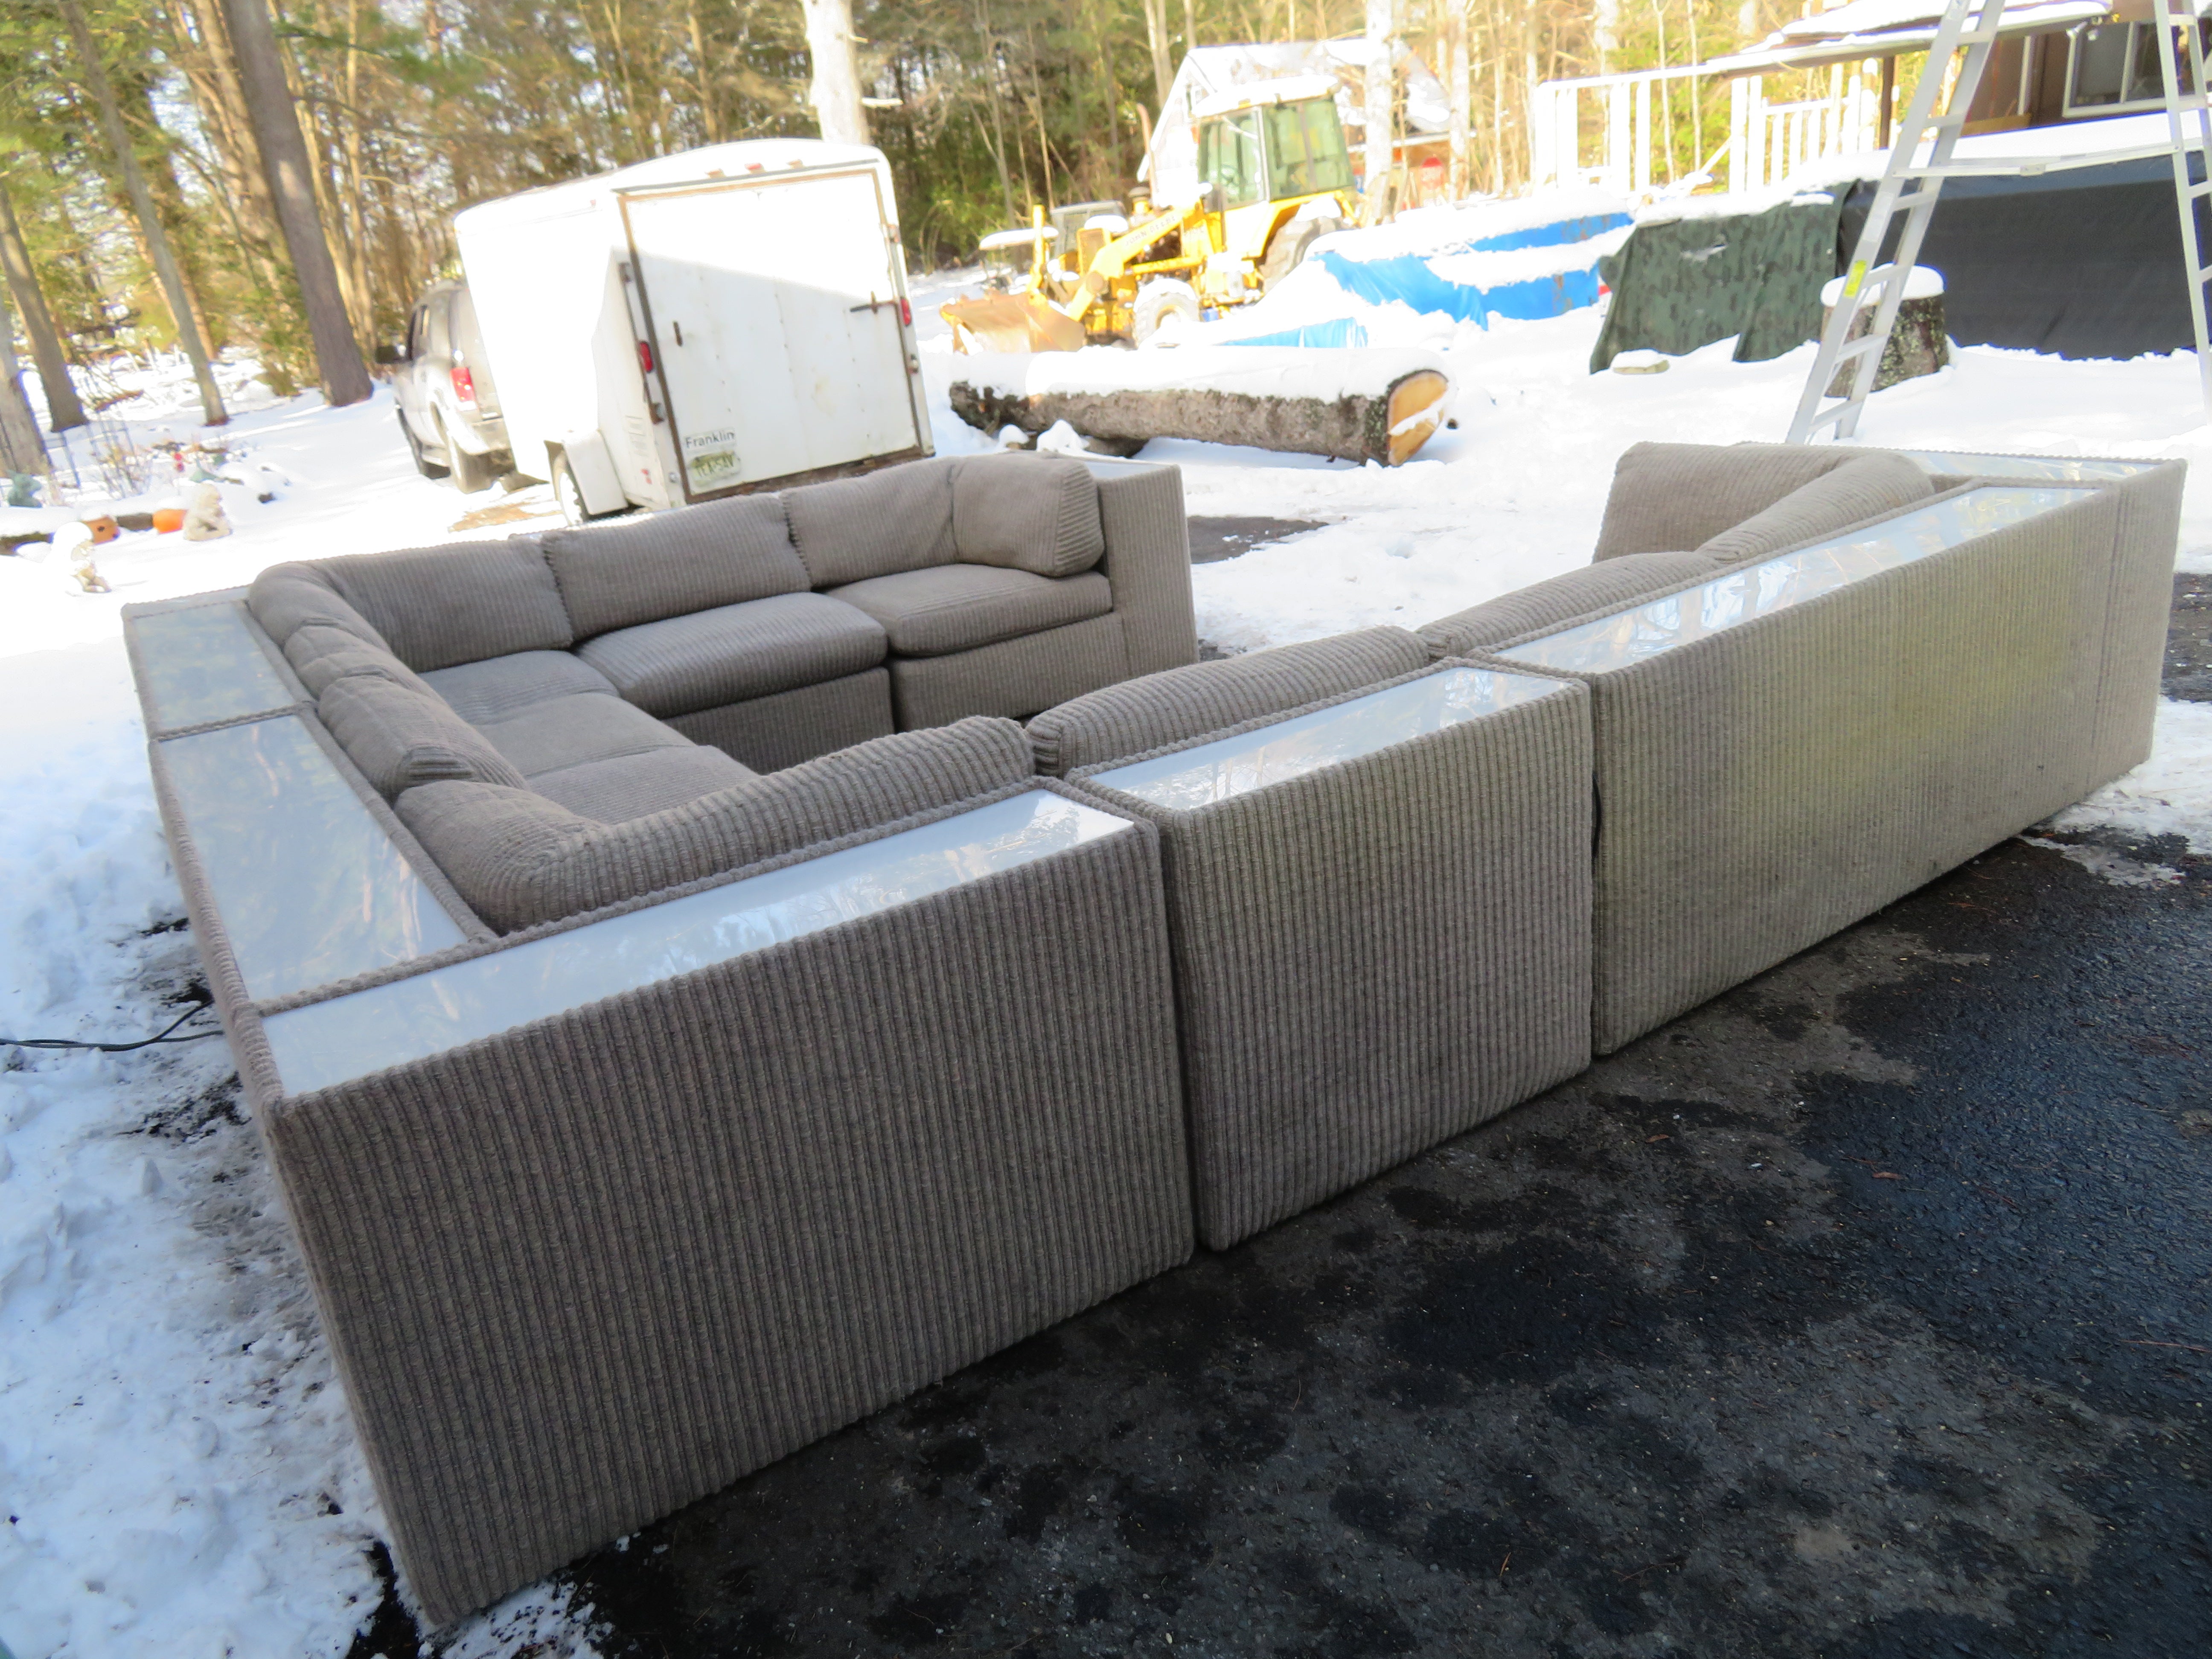 Magnificent 6 piece Milo Baughman for Thayer Coggin sectional sofa. This is possibly the most fabulous sofa by Mr. Baughman we have ever had. The entire back is surrounded by a built-in illuminated box ledge-great place to put your drink or place